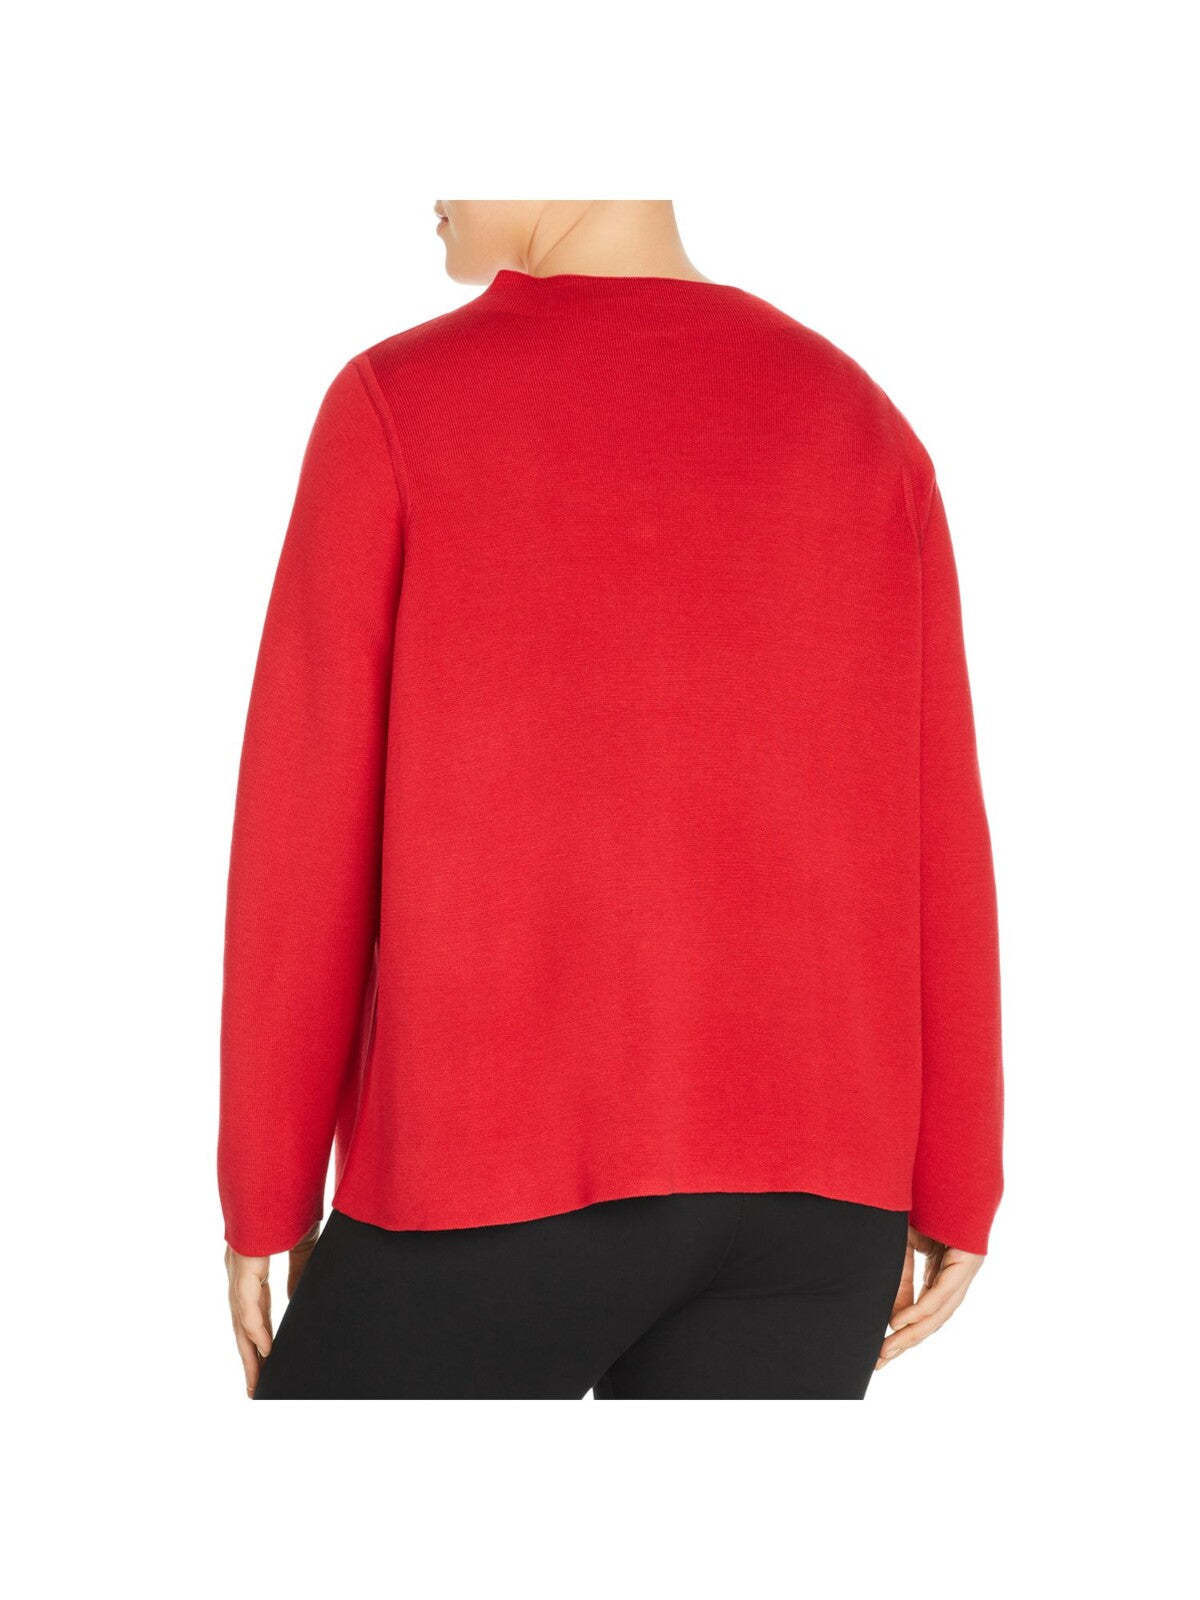 EILEEN FISHER Womens Red Stretch Ribbed Funnel Neck Long Sleeve Wear To Work Sweater Plus 1X